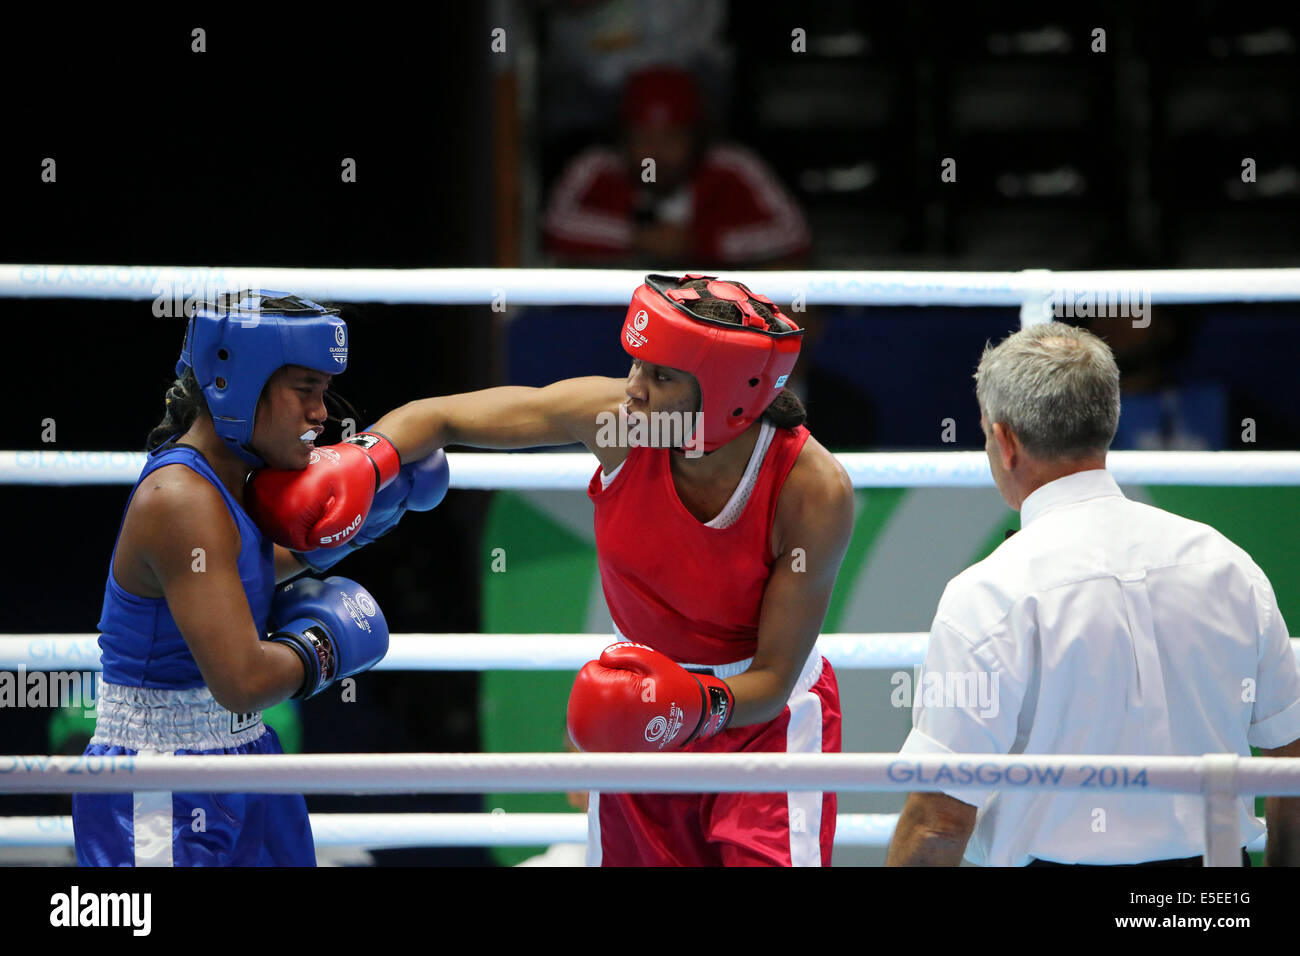 SECC Glasgow Scotland 29 Jul 2014. Commonwealth Games day 6. Men's and Women's boxing rounds. Natasha Jonas ENG lost out on a split decision to Shelley Watts AUS in the Women's Light final 16 round Credit:  ALAN OLIVER/Alamy Live News Stock Photo